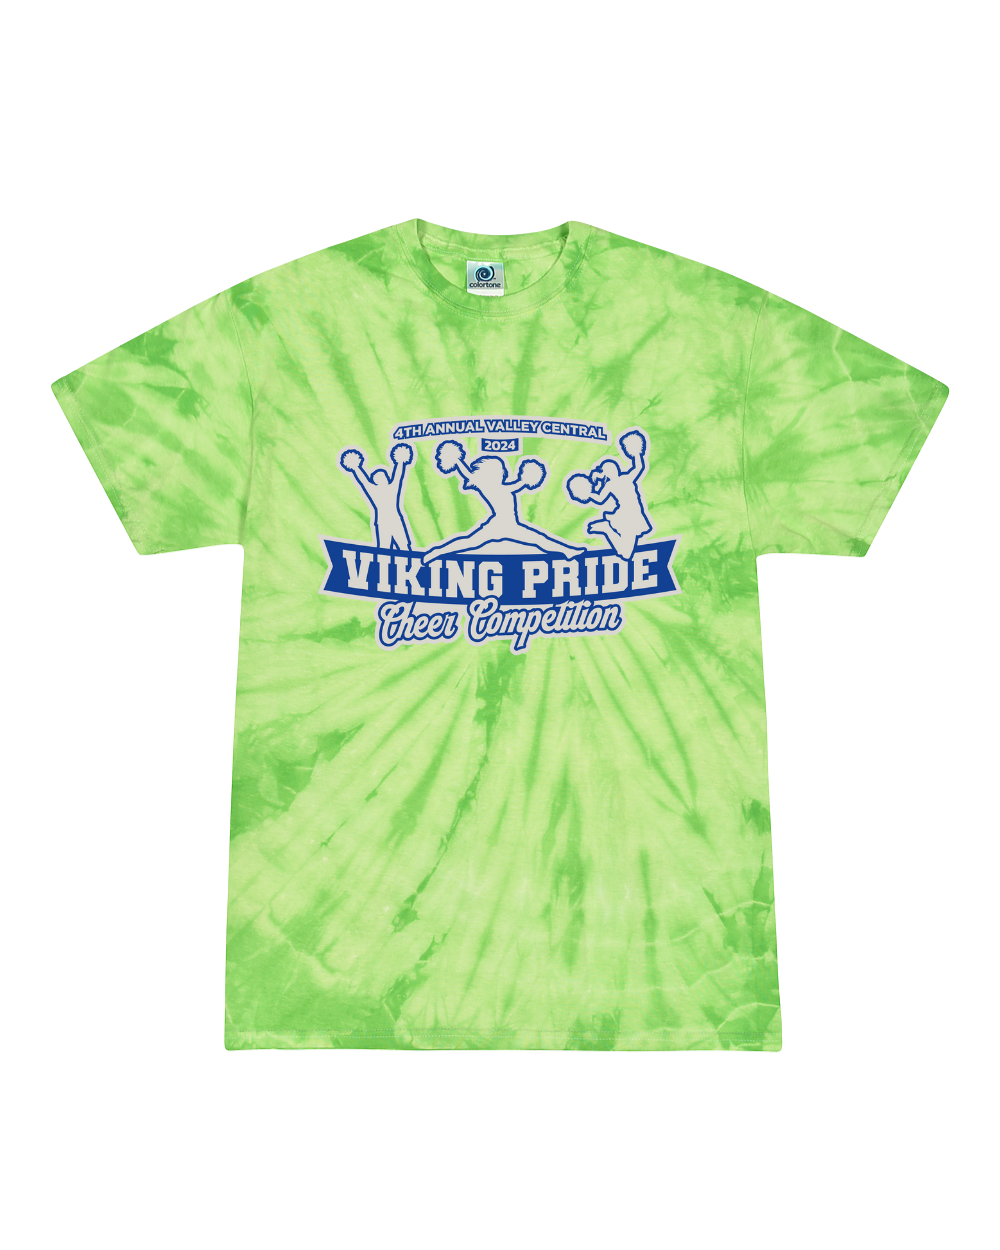 4th Annual Center Valley Viking Pride Cheer Competition - Tie Dye Tee